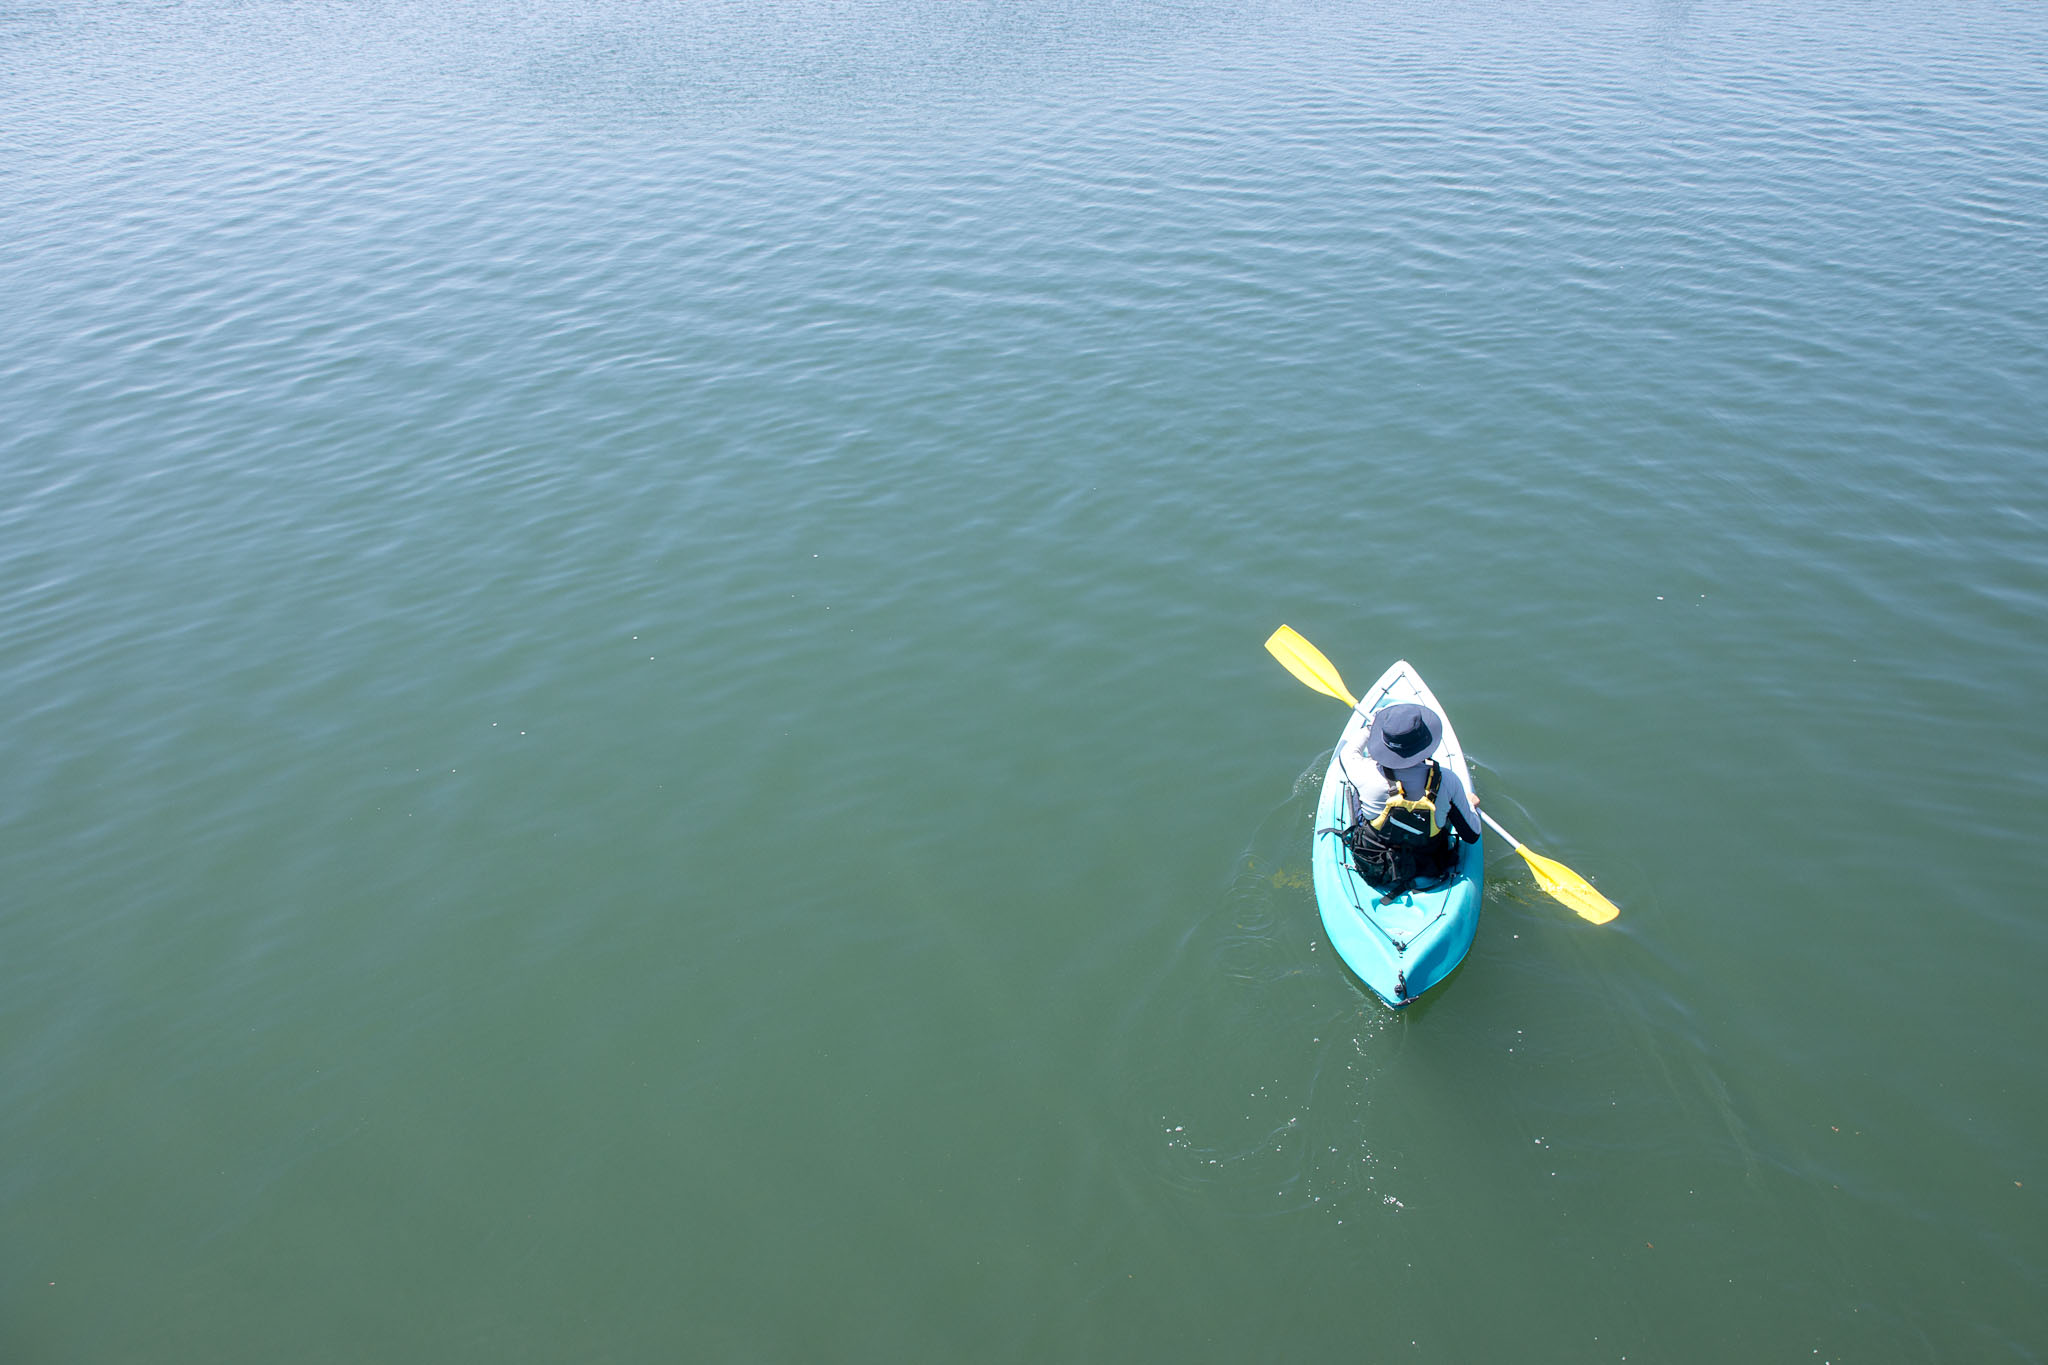 Single kayaker paddling on the water aerial view